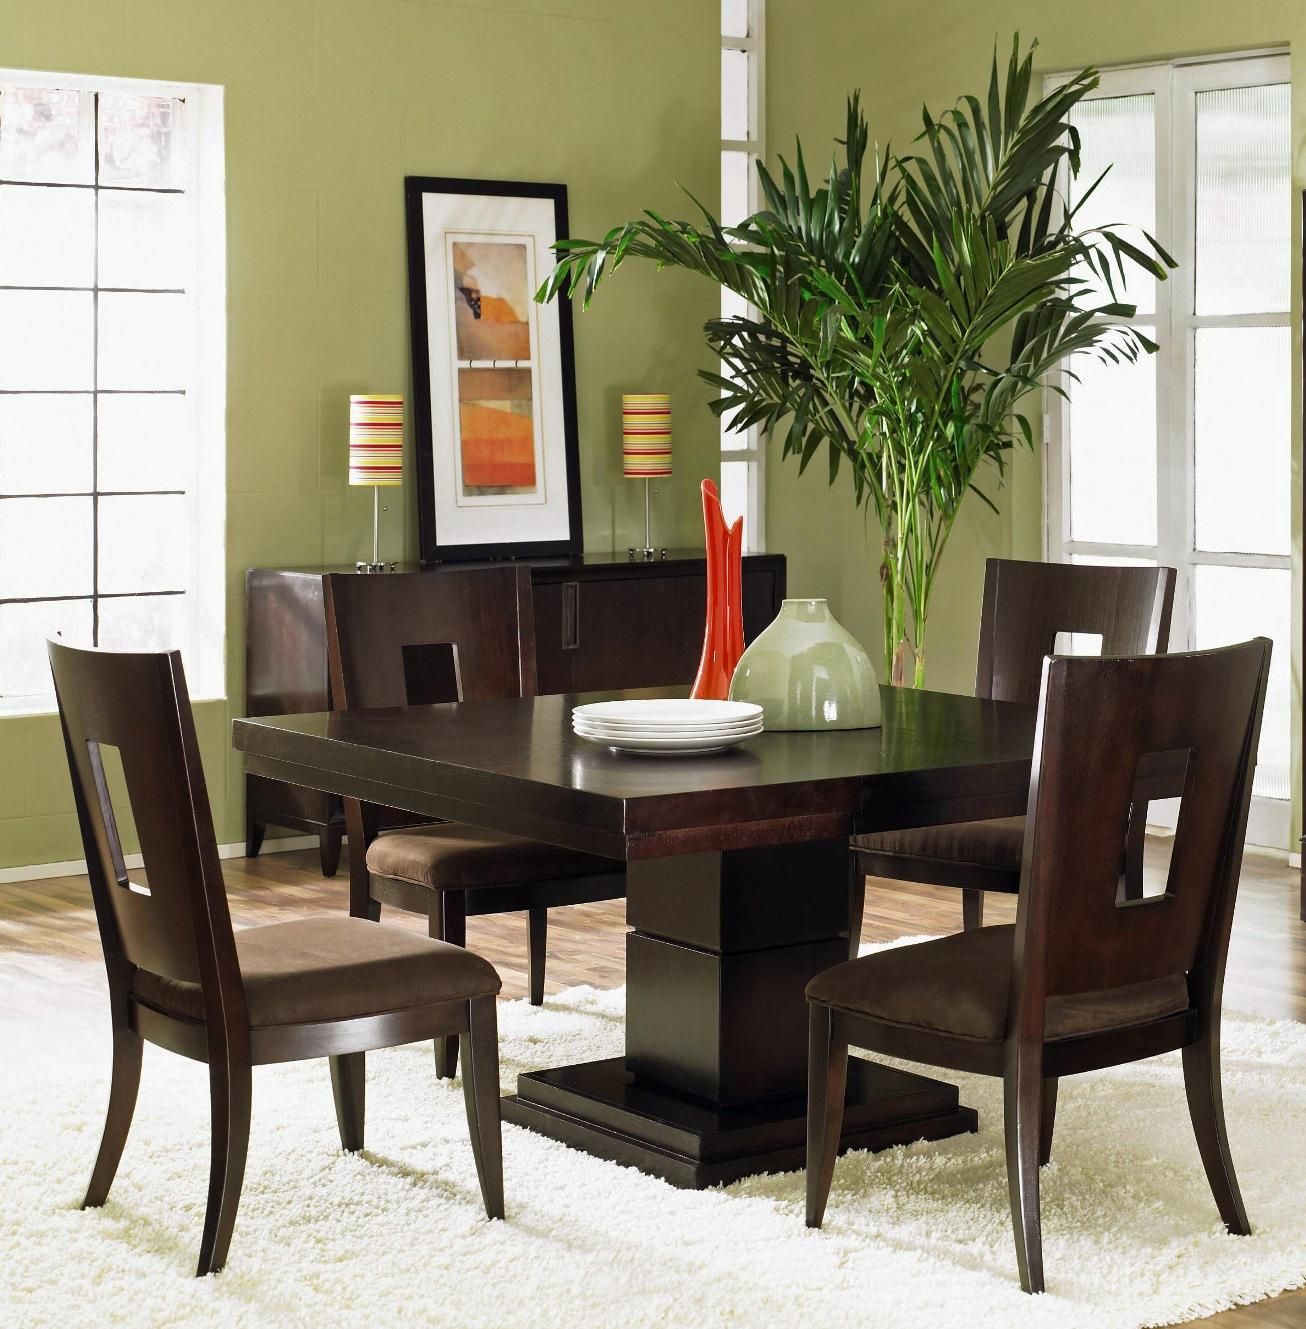 Dining Area Table Design And Style